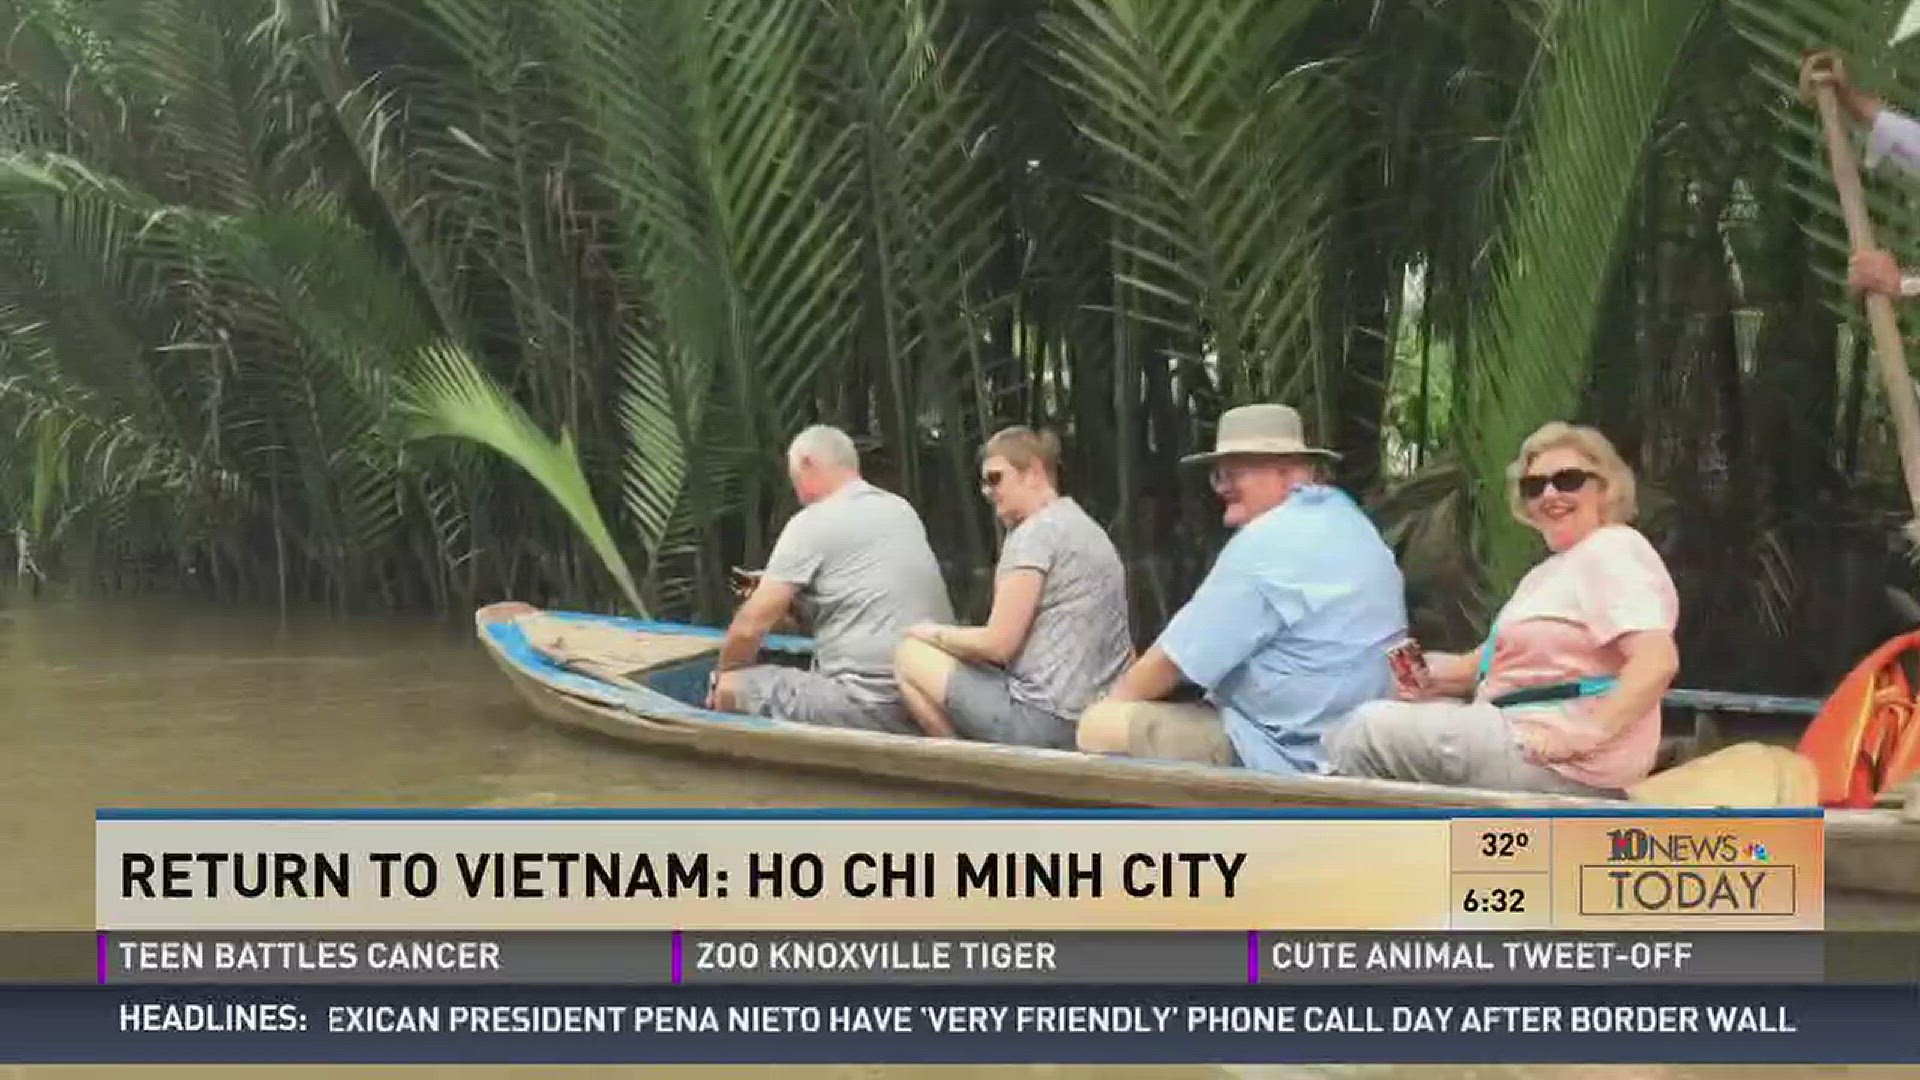 John Becker's coverage from Vietnam continues in Ho Chi Minh City